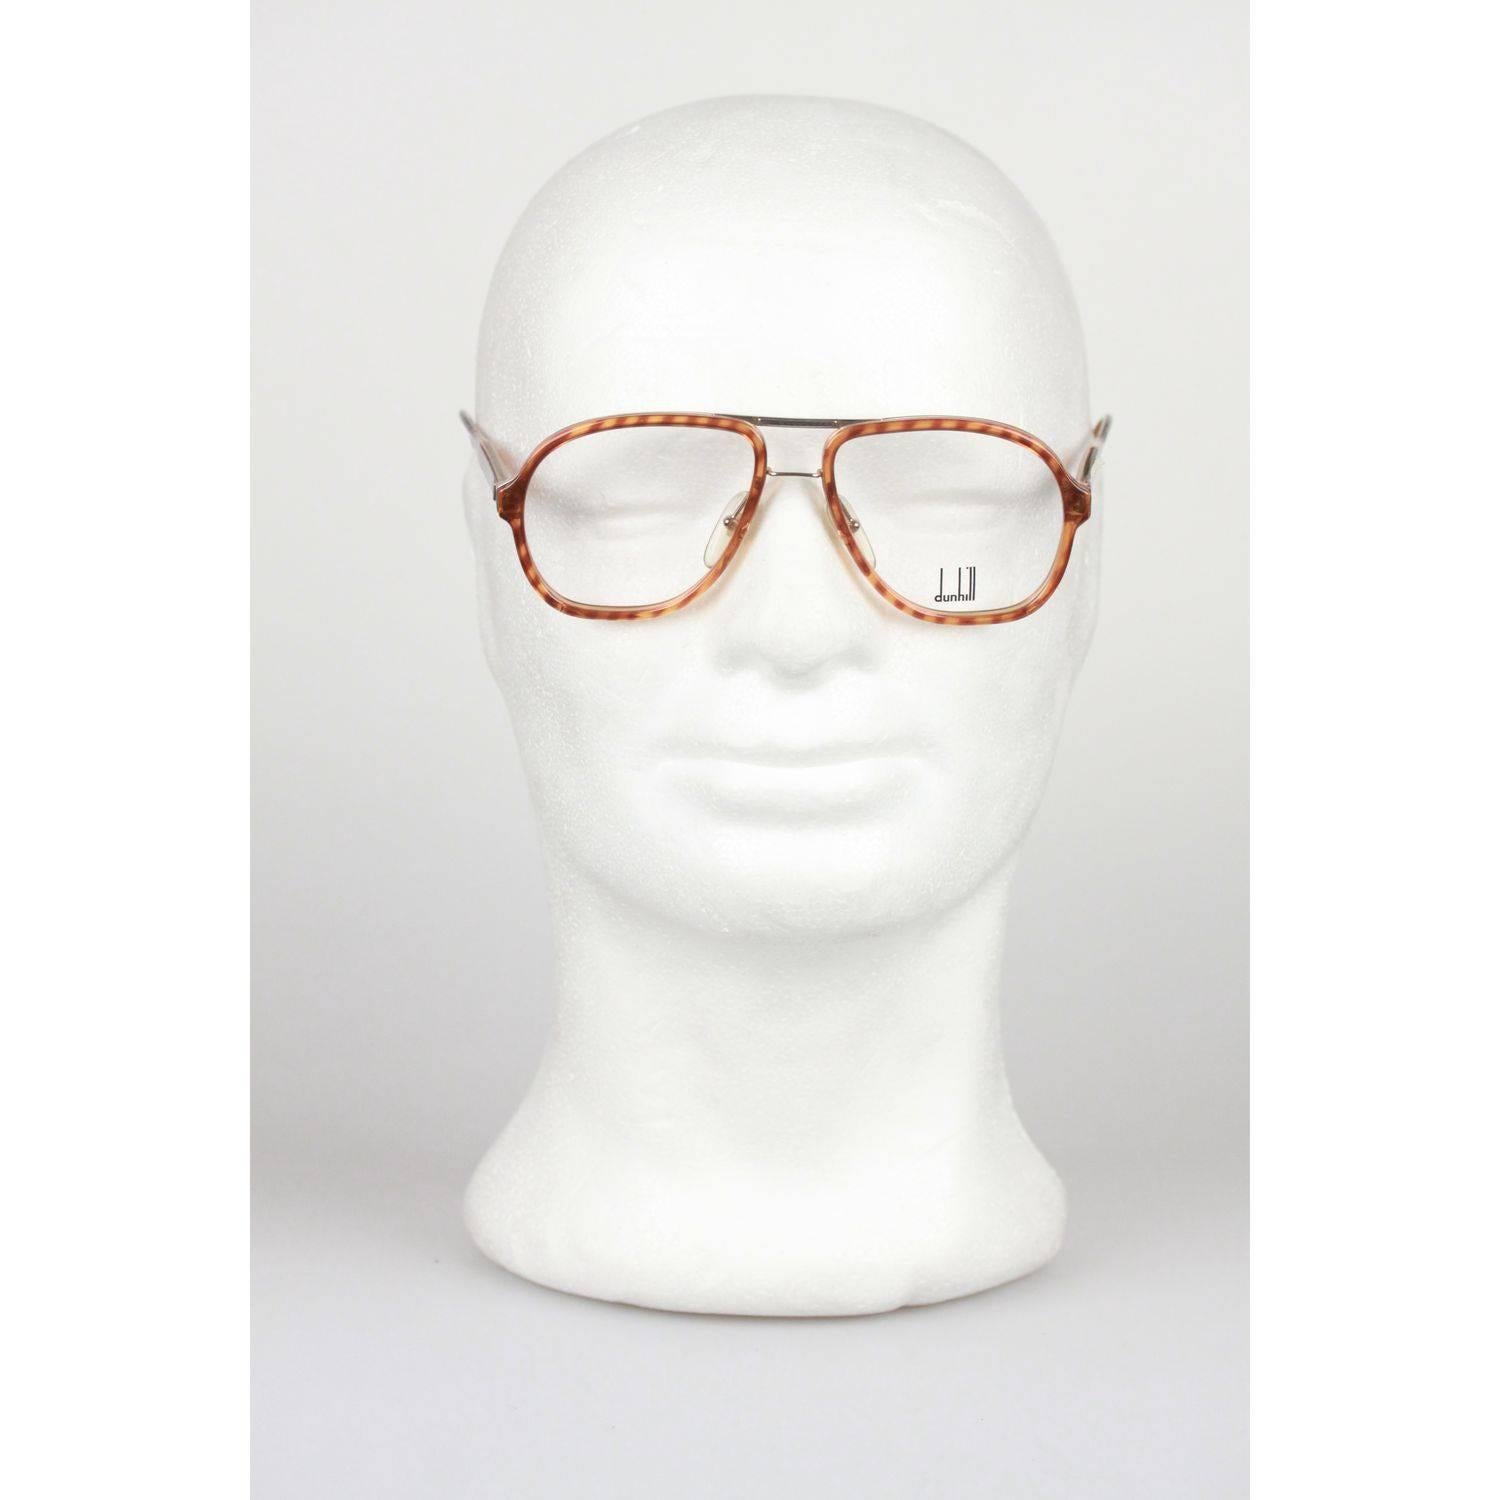 - Aviator-shaped Alfred Dunhill eyeglasses
- Premium quality Optyl LCM frame from the eighties
- Brown tortoise plastic frame with metal double bridge
- Clear demo lenses withembossed DUNHILL logo
- Made in Germany

Style & ref.: 6077 - 11 -